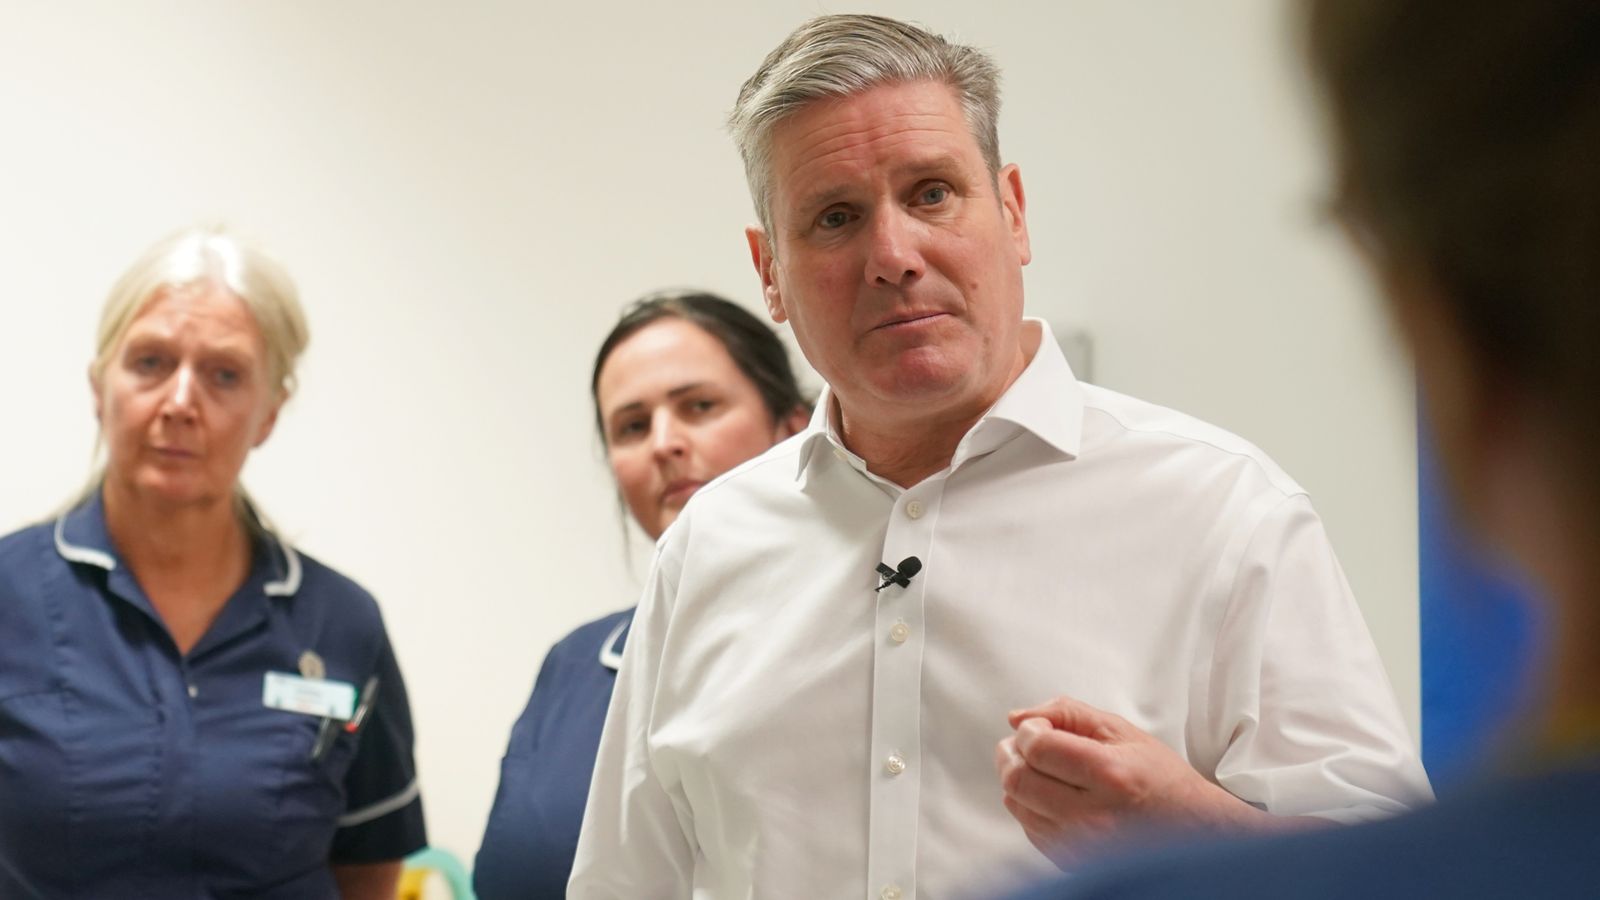 Keir Starmer urged to snub Israeli ambassador over 'Islamophobic' rejection of two-state solution